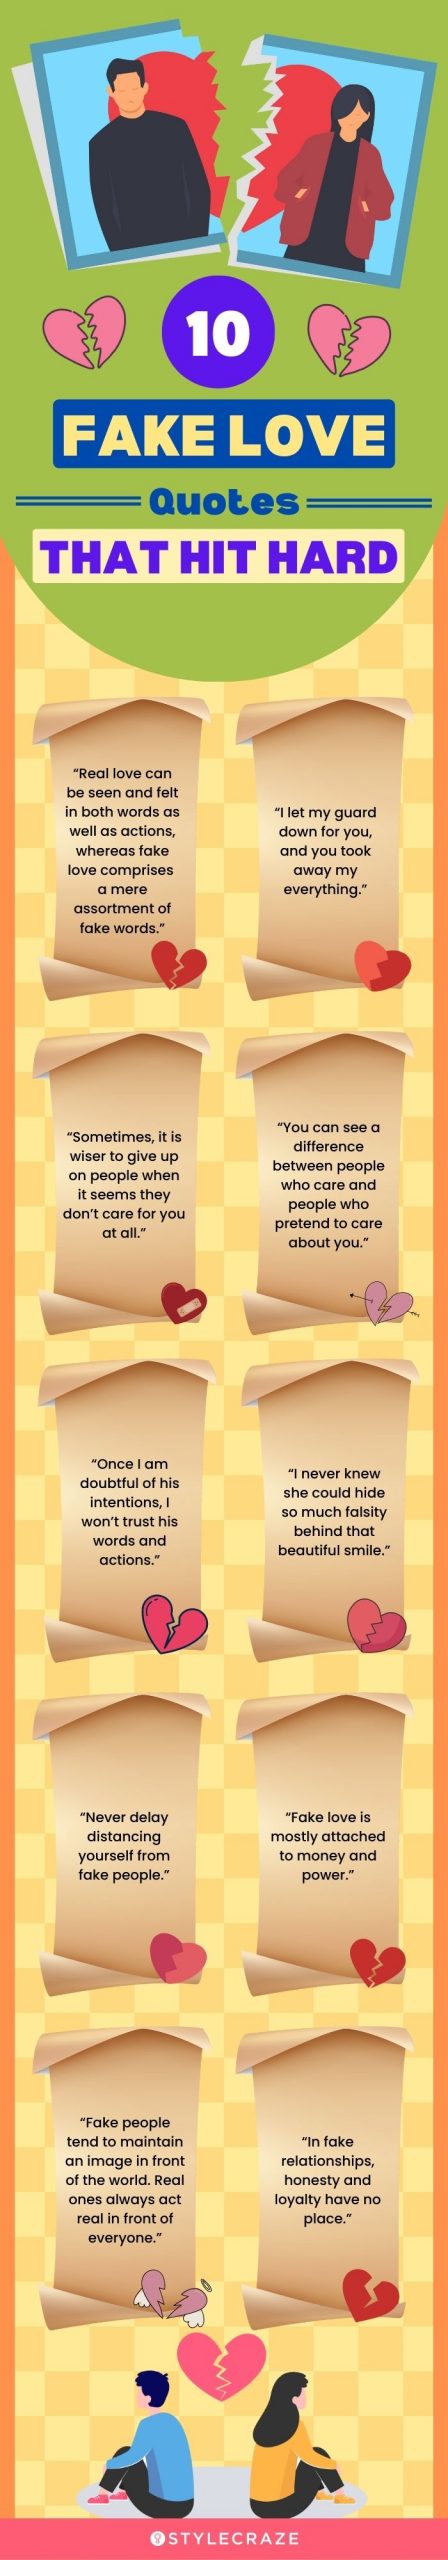 10 fake love quotes that hit hard (infographic)